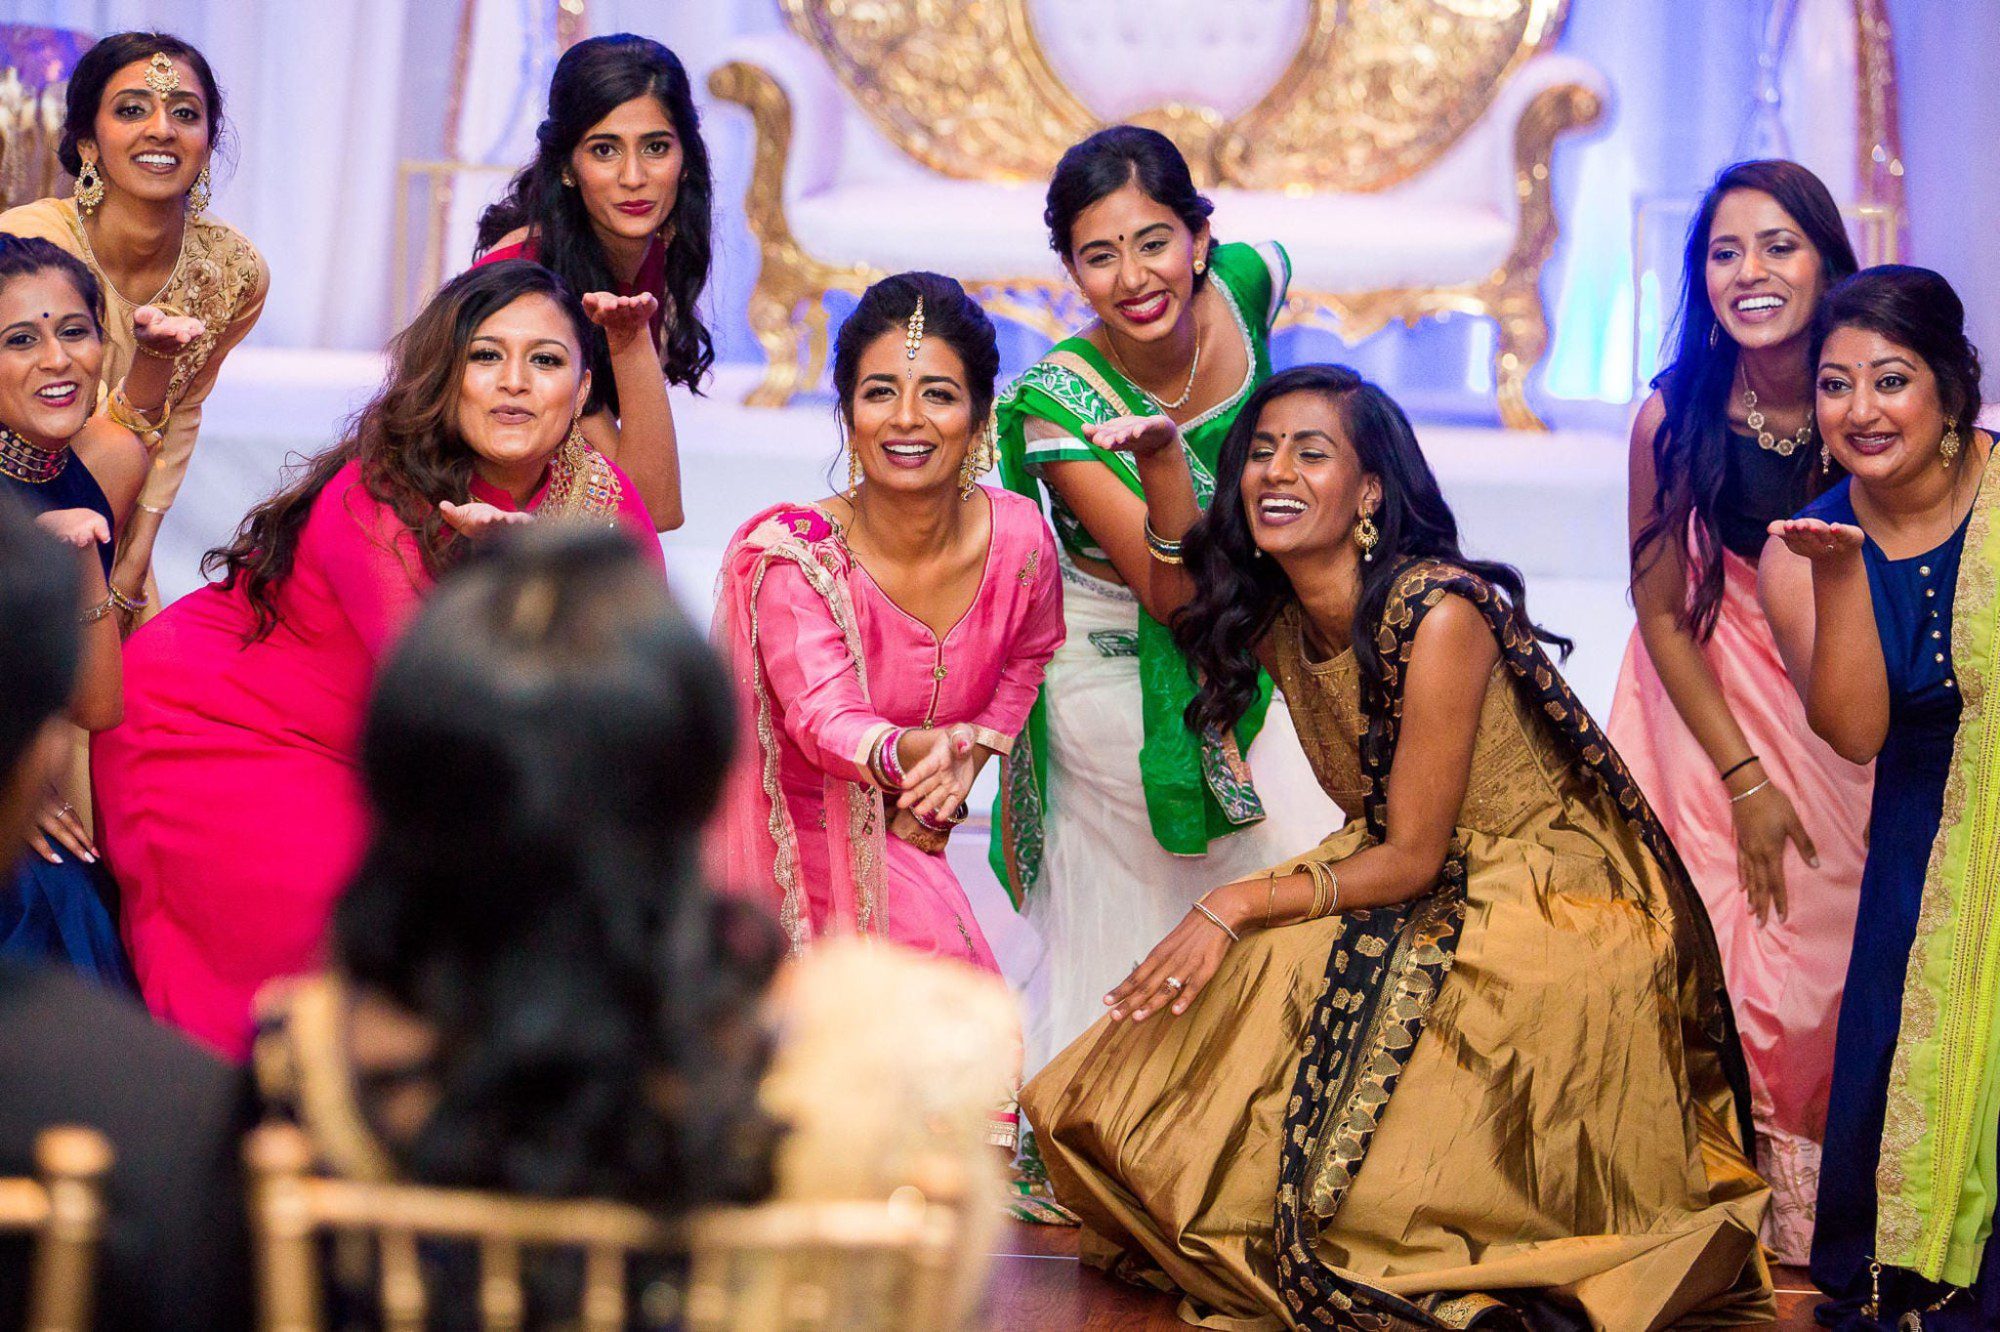 Friends performaning during sangeet